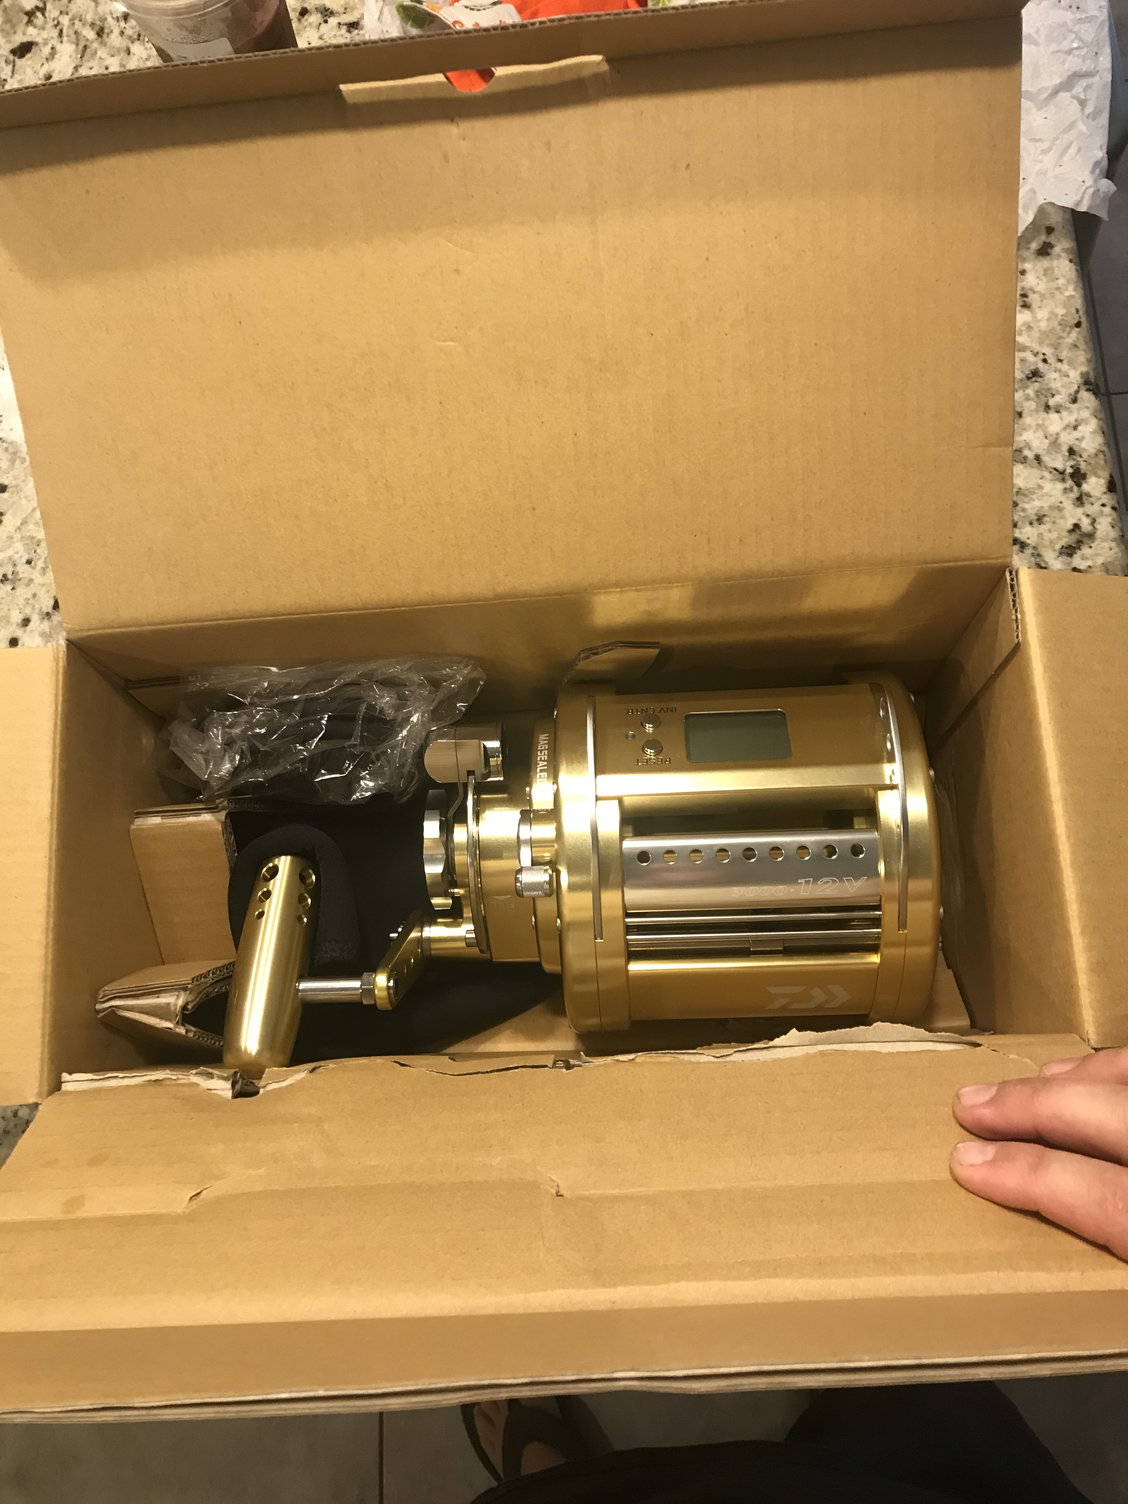 Daiwa Marine Power 3000 12V Electric Reel BRAND NEW - The Hull Truth -  Boating and Fishing Forum